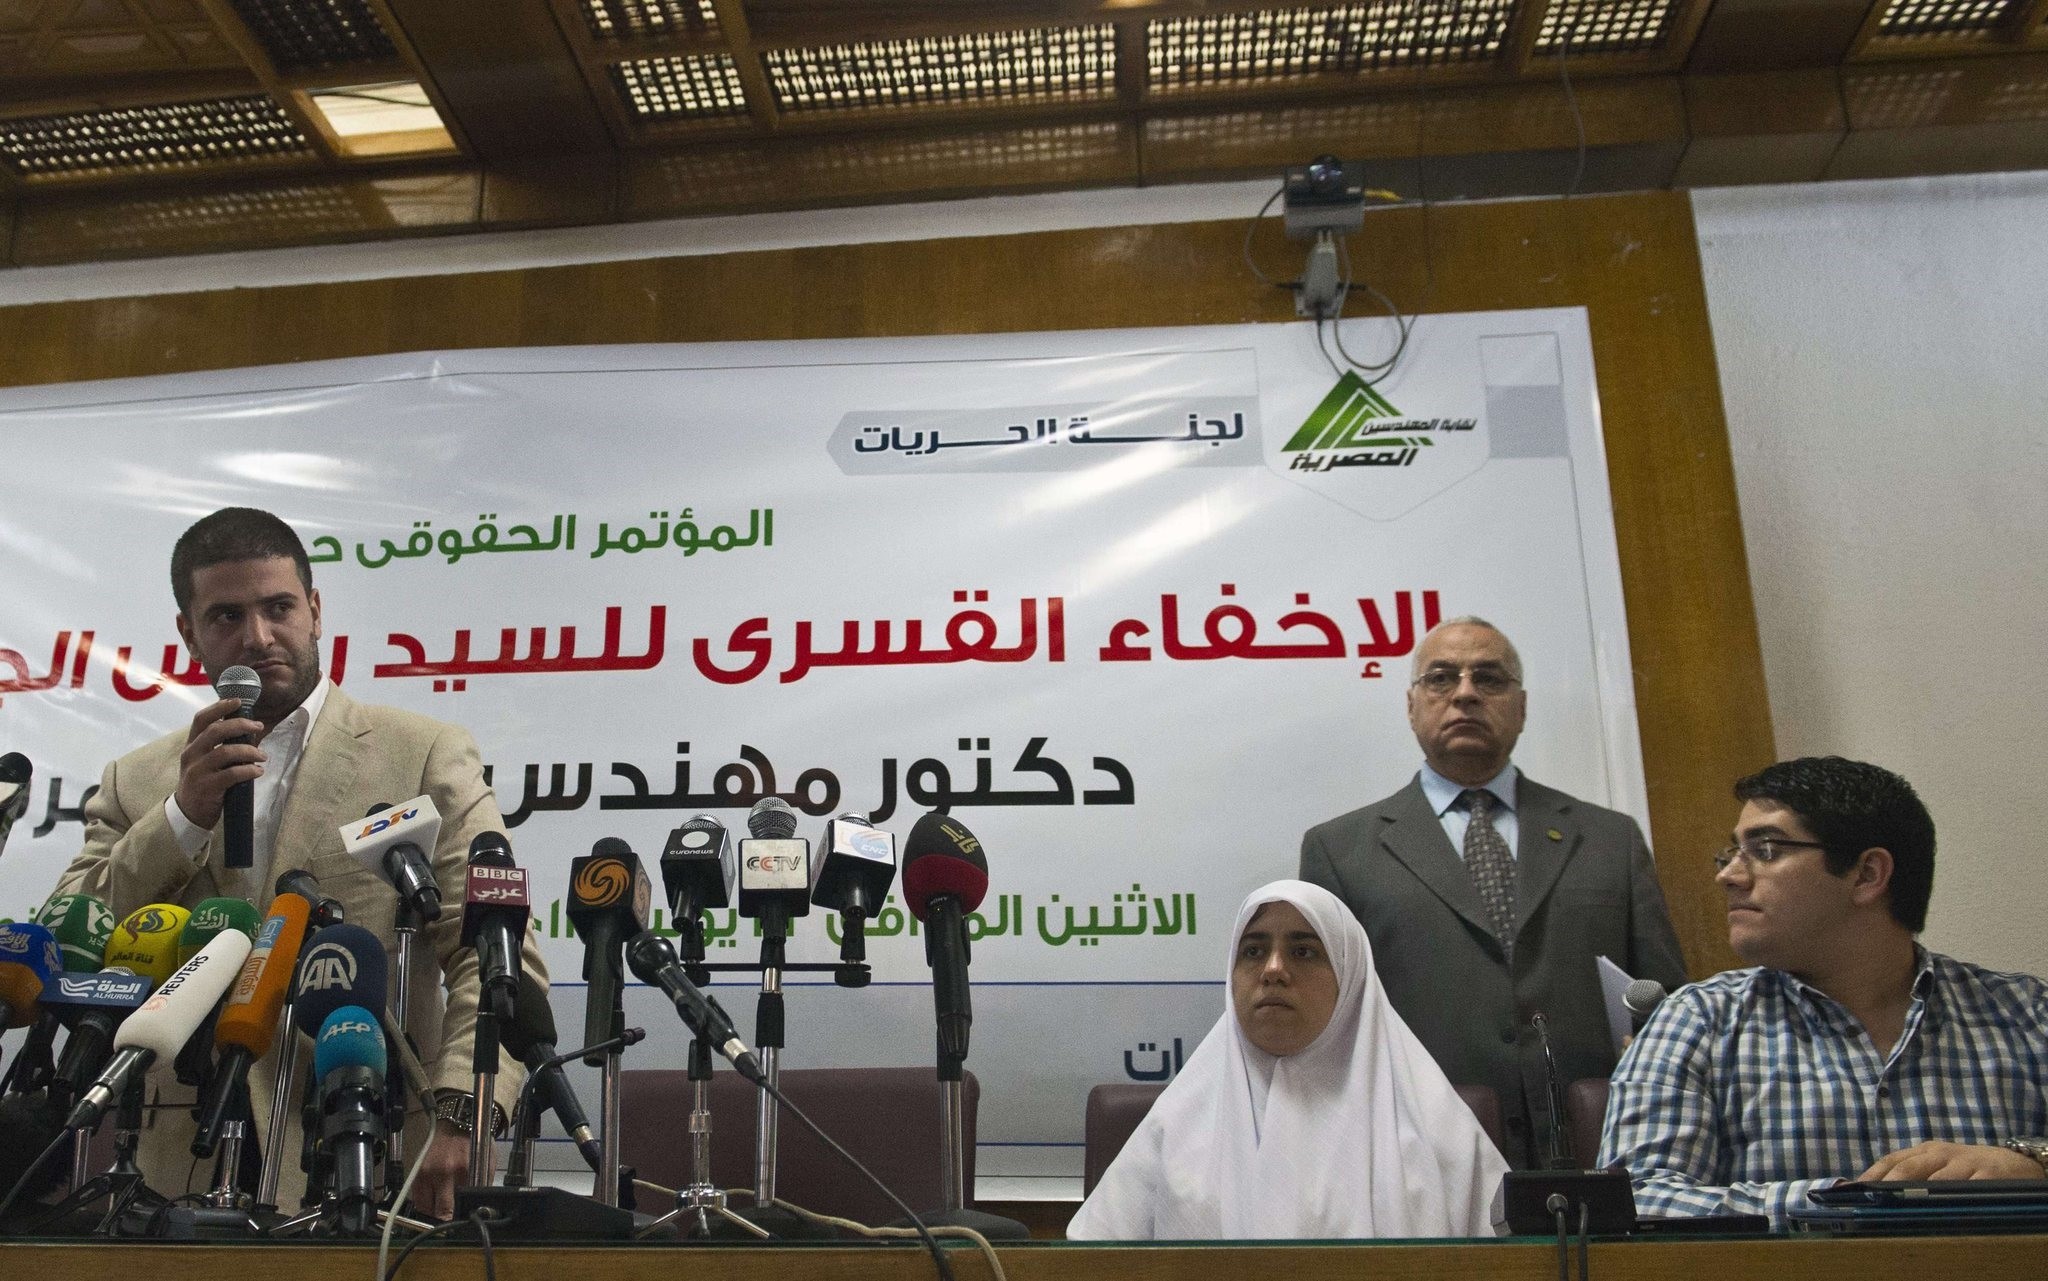 Osama (L), Shaimaa (C) and Abdulah (R) Mohamed Morsi, the sons and daughter of Egypt's ousted president Mohamed Morsi give a press conference in Cairo on July 22, 2013. (AFP Photo)